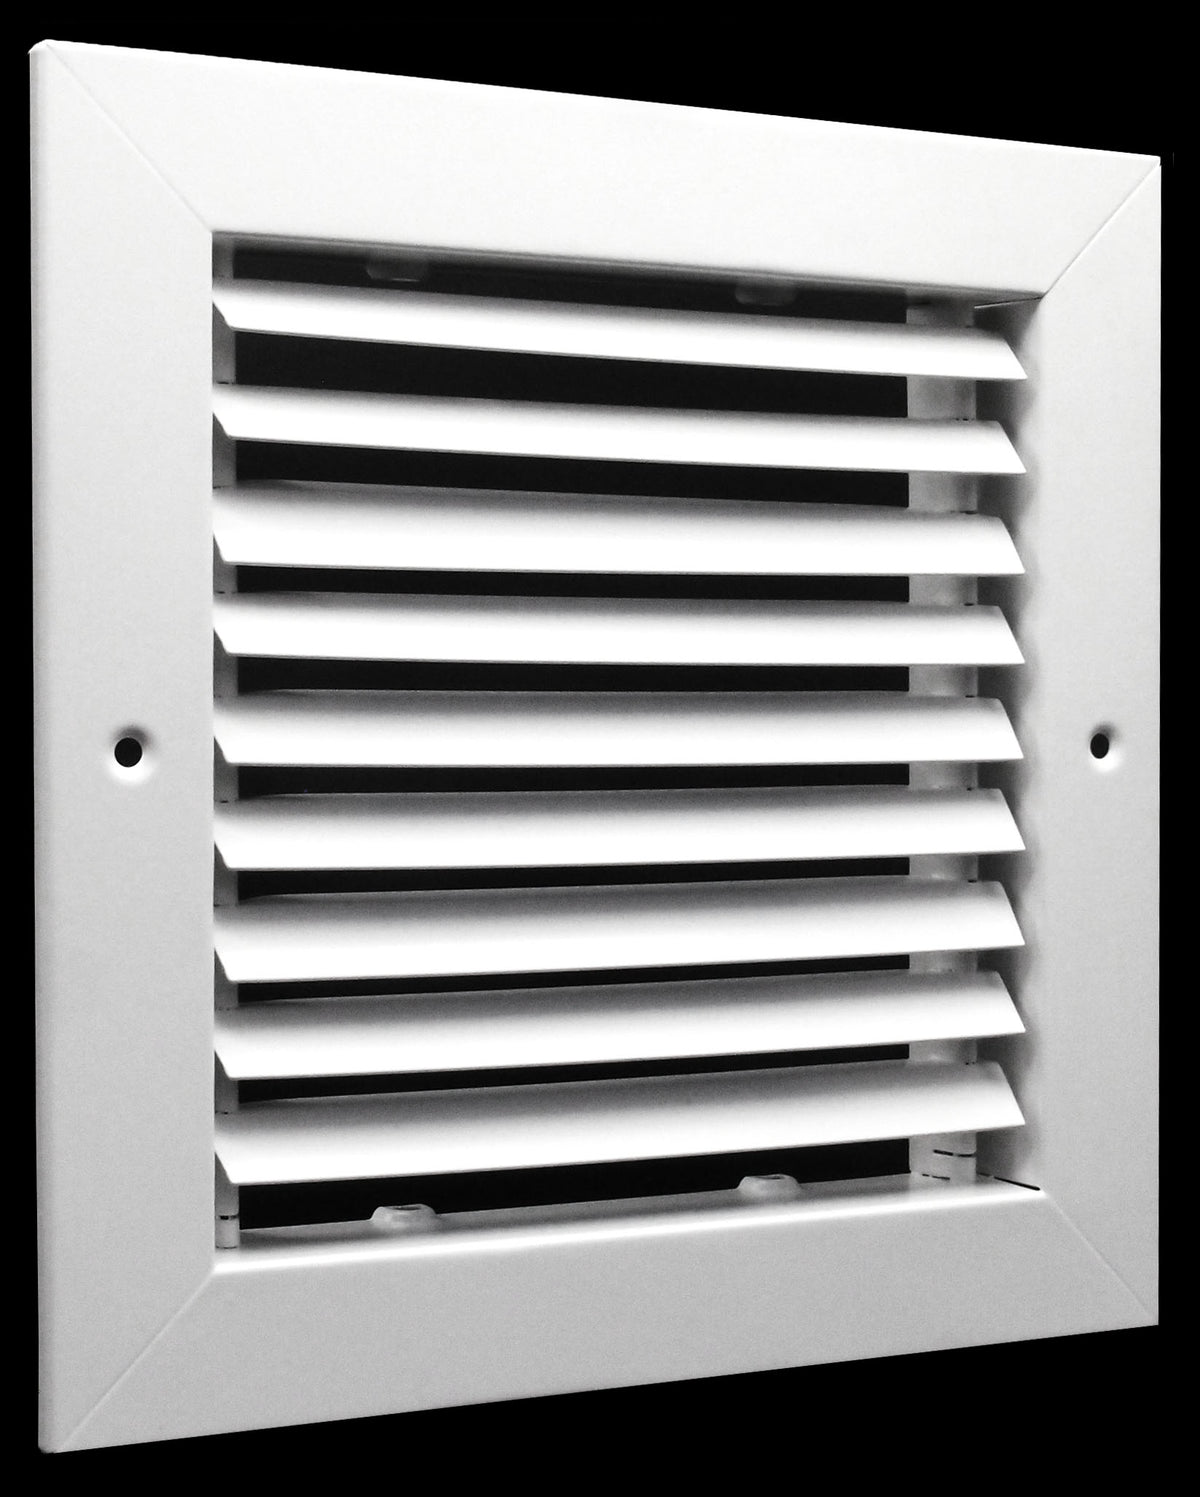 6&quot; x 6&quot; Fixed Bar Return Grille - Sidewall and Ceiling